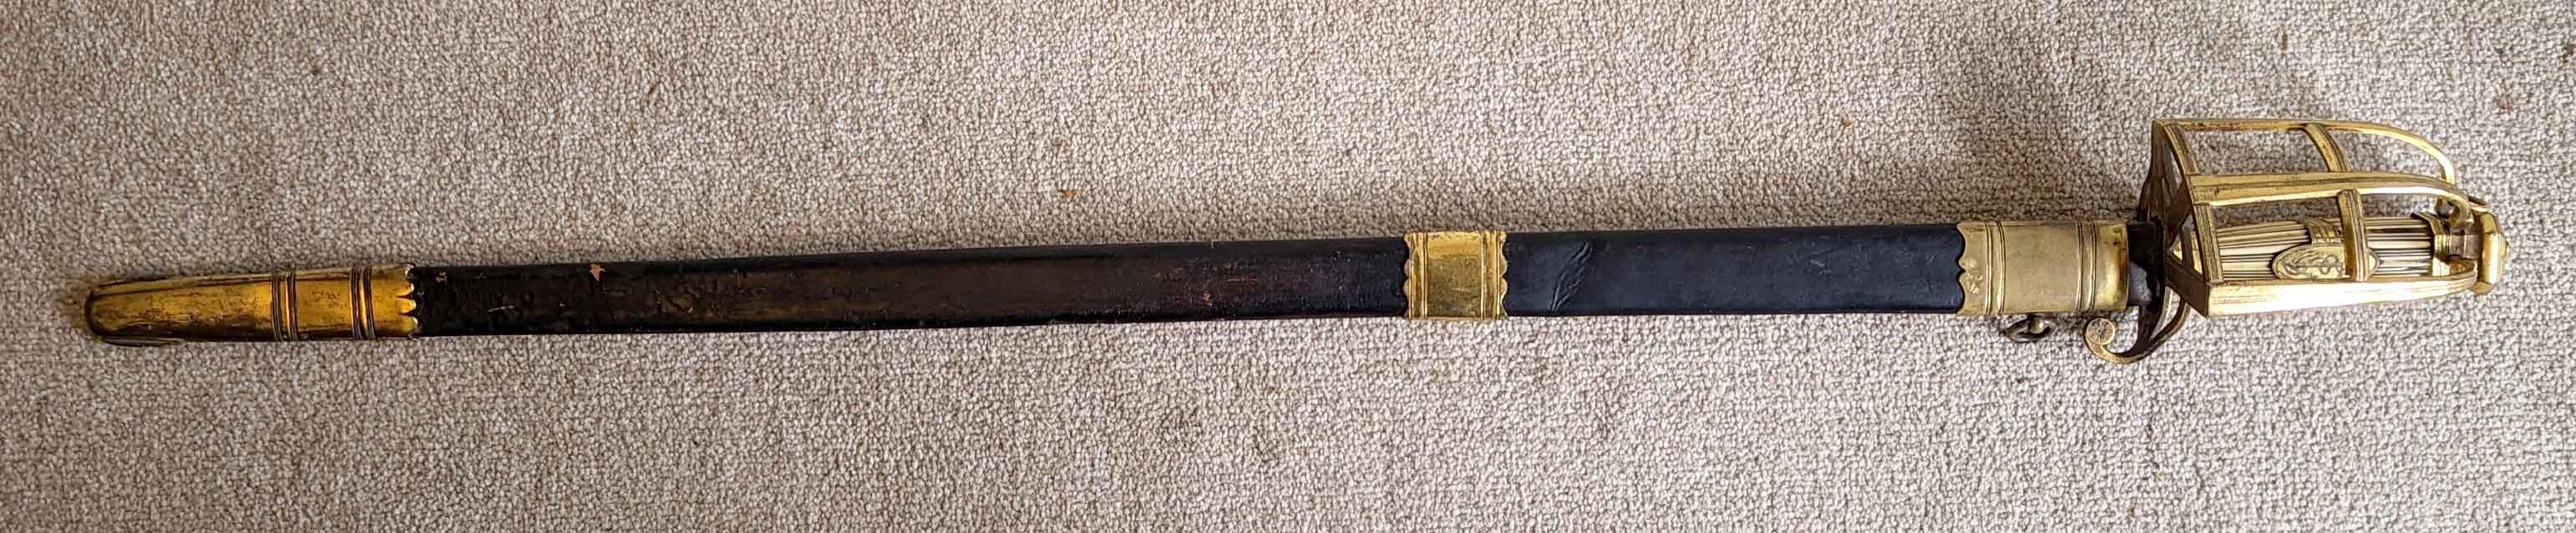 A fine and rare Naval Officers sword that dates from around 1790. It has a reeded ivory grip contained in a gilt mounted leather scabbard.

The sword is sold with a framed and glazed signed affidavit stating that it had previously been in the